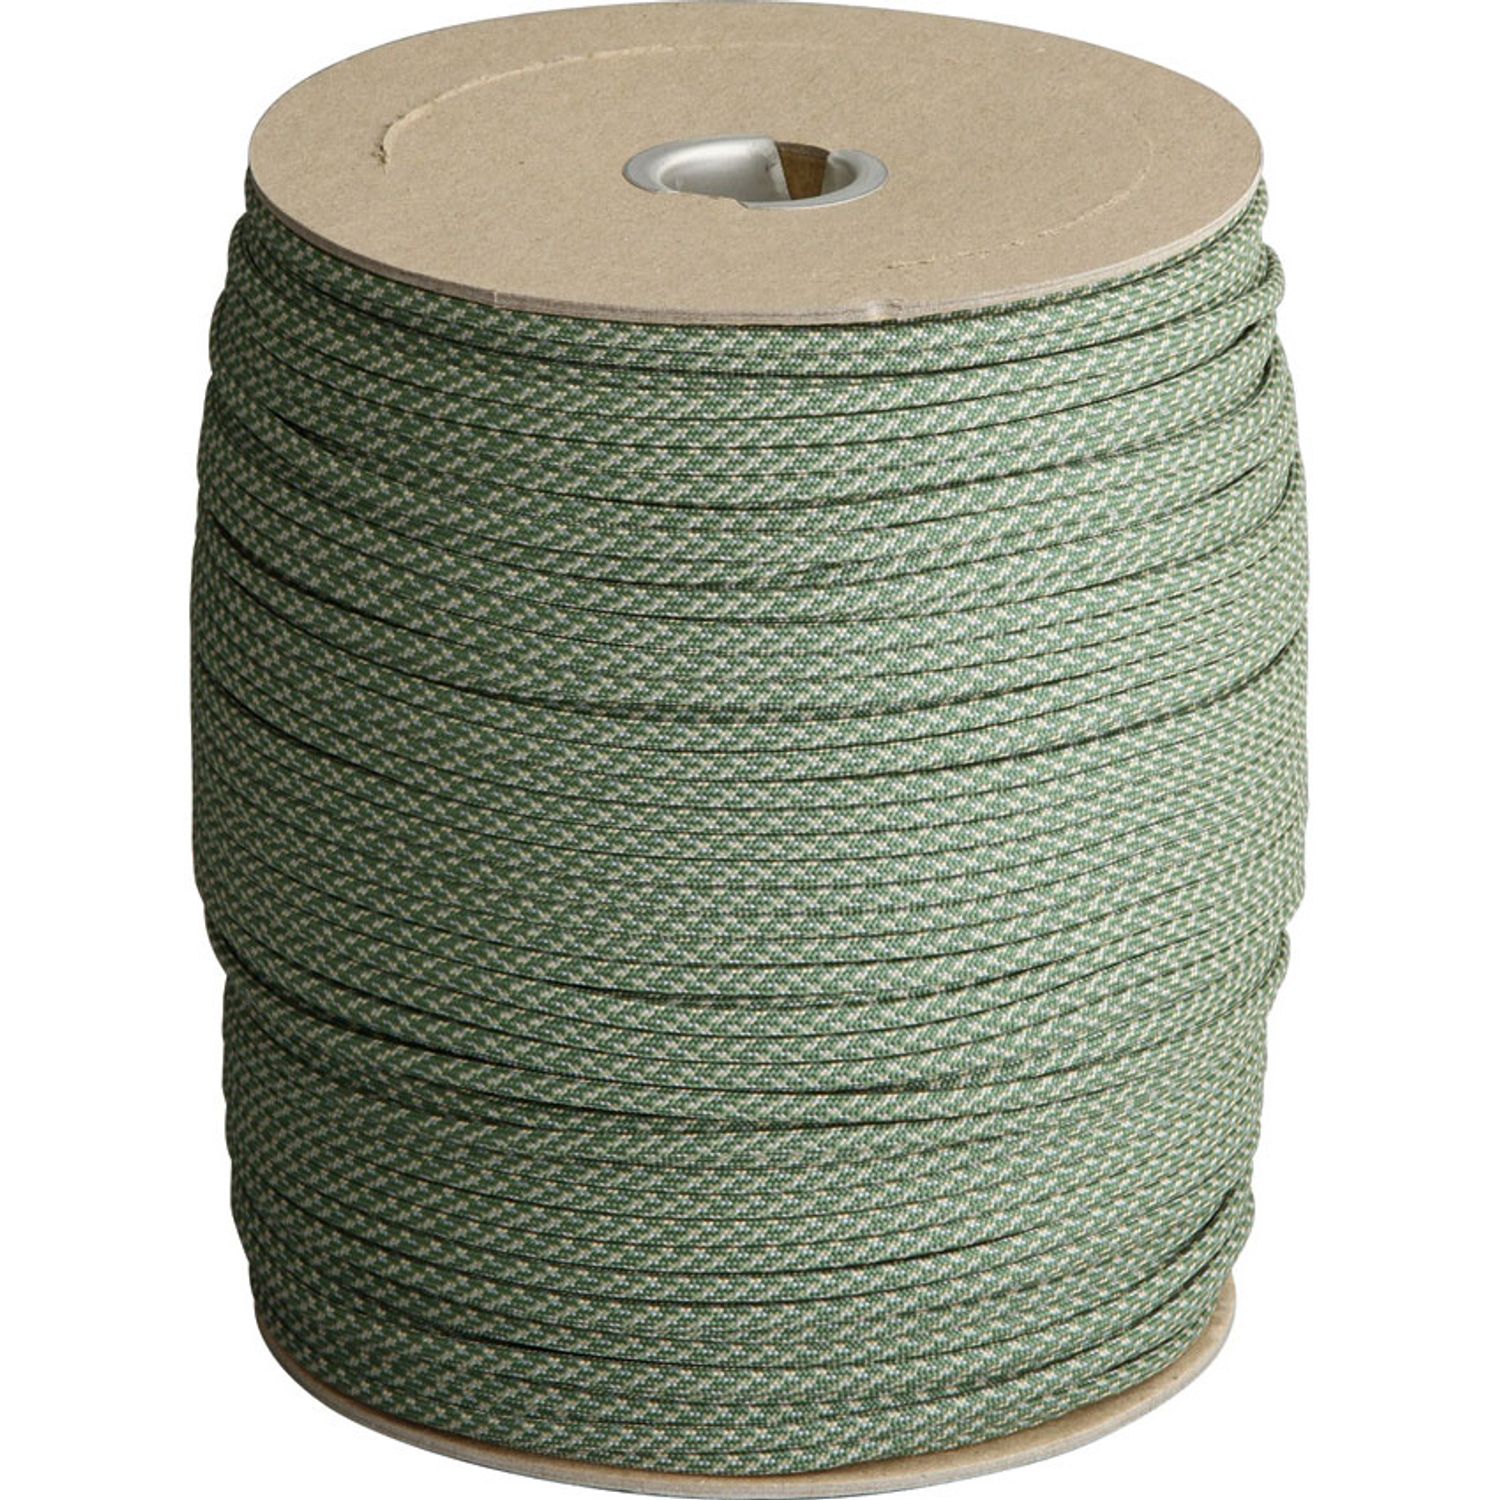 Atwood Rope 550 Paracord, Digital ACU, 1000 Foot Spool - KnifeCenter -  RG003S